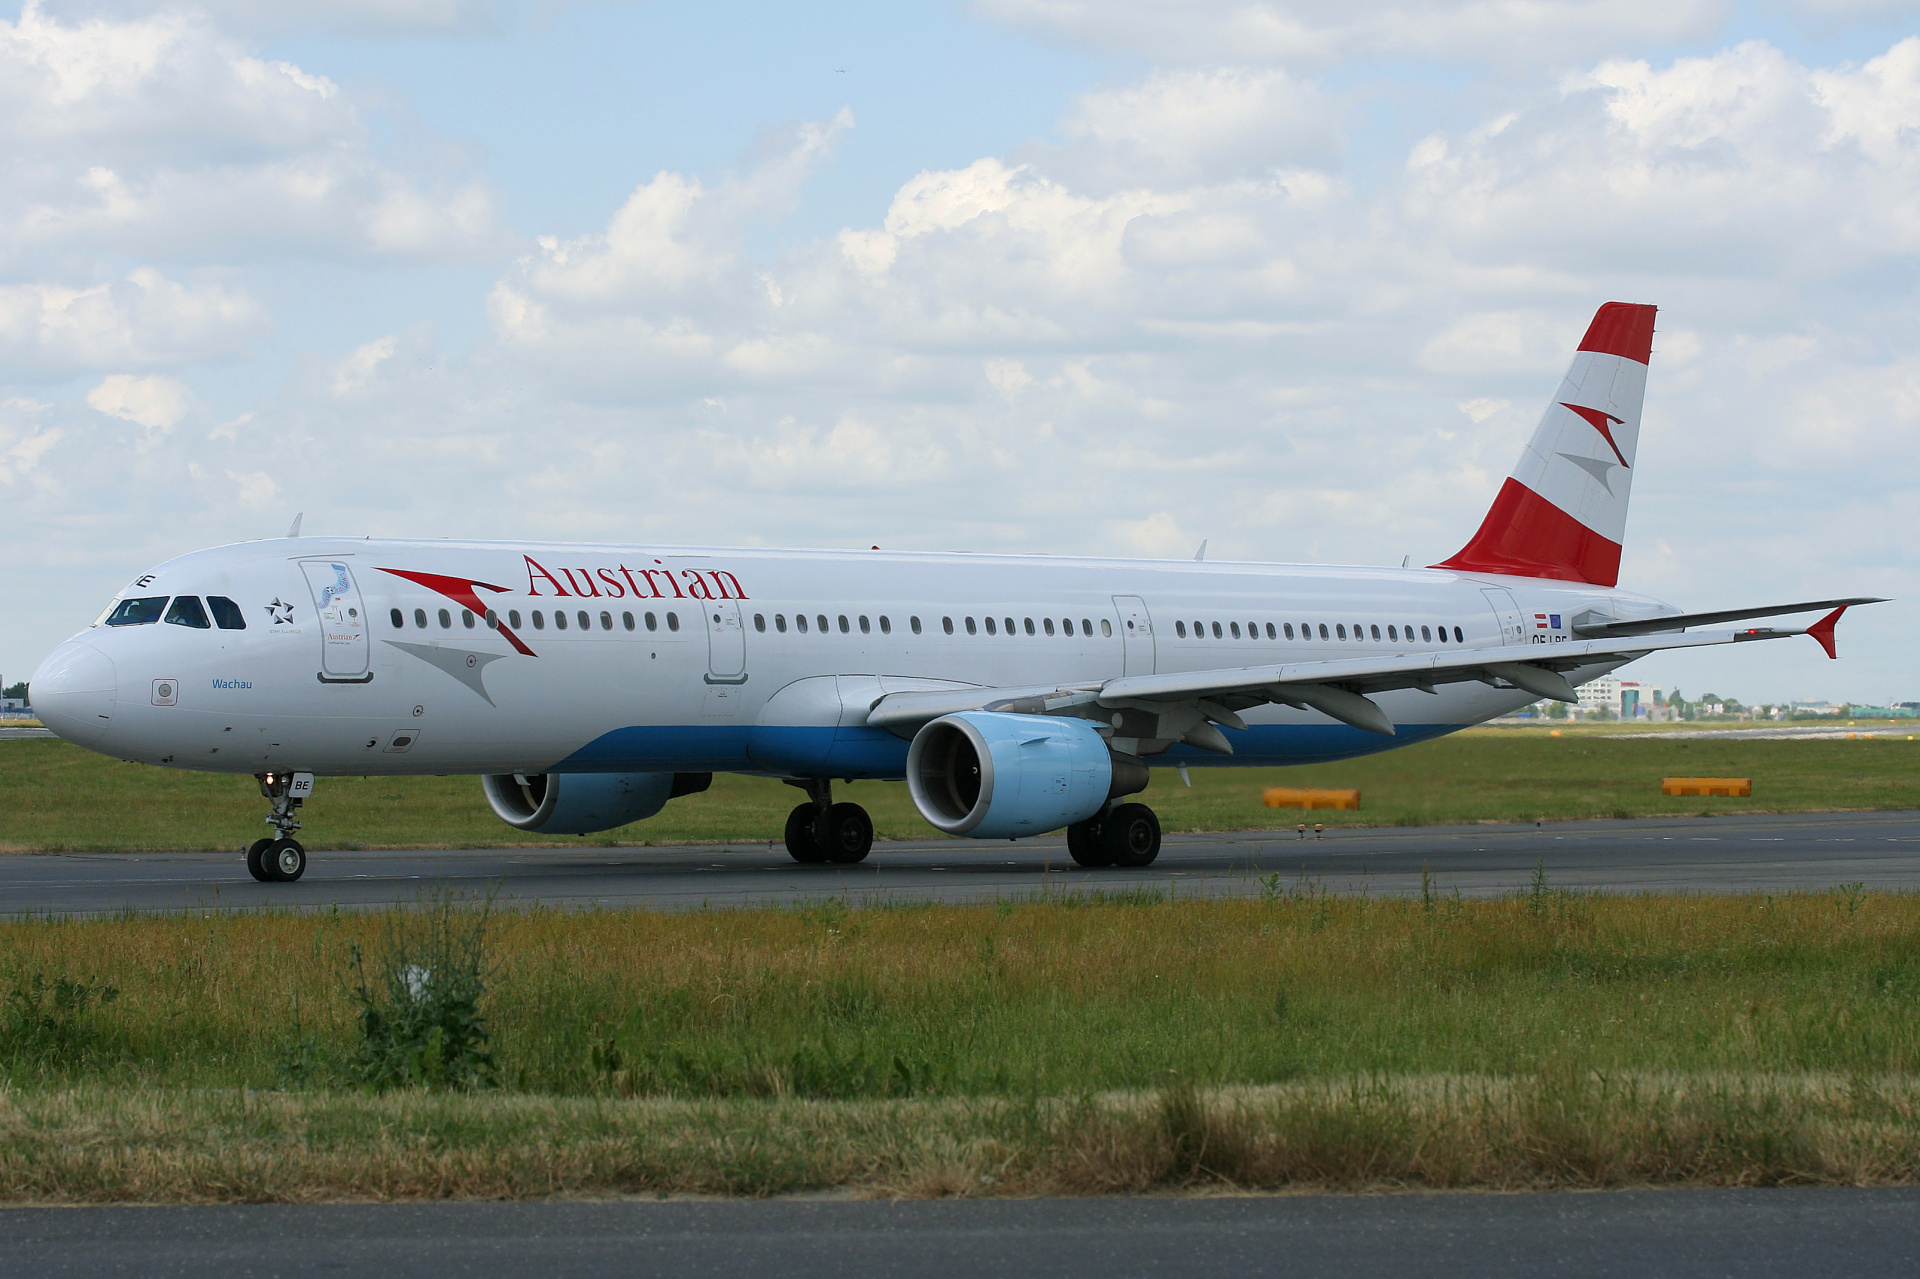 OE-LBE, Austrian Airlines (Aircraft » EPWA Spotting » Airbus A321-200)